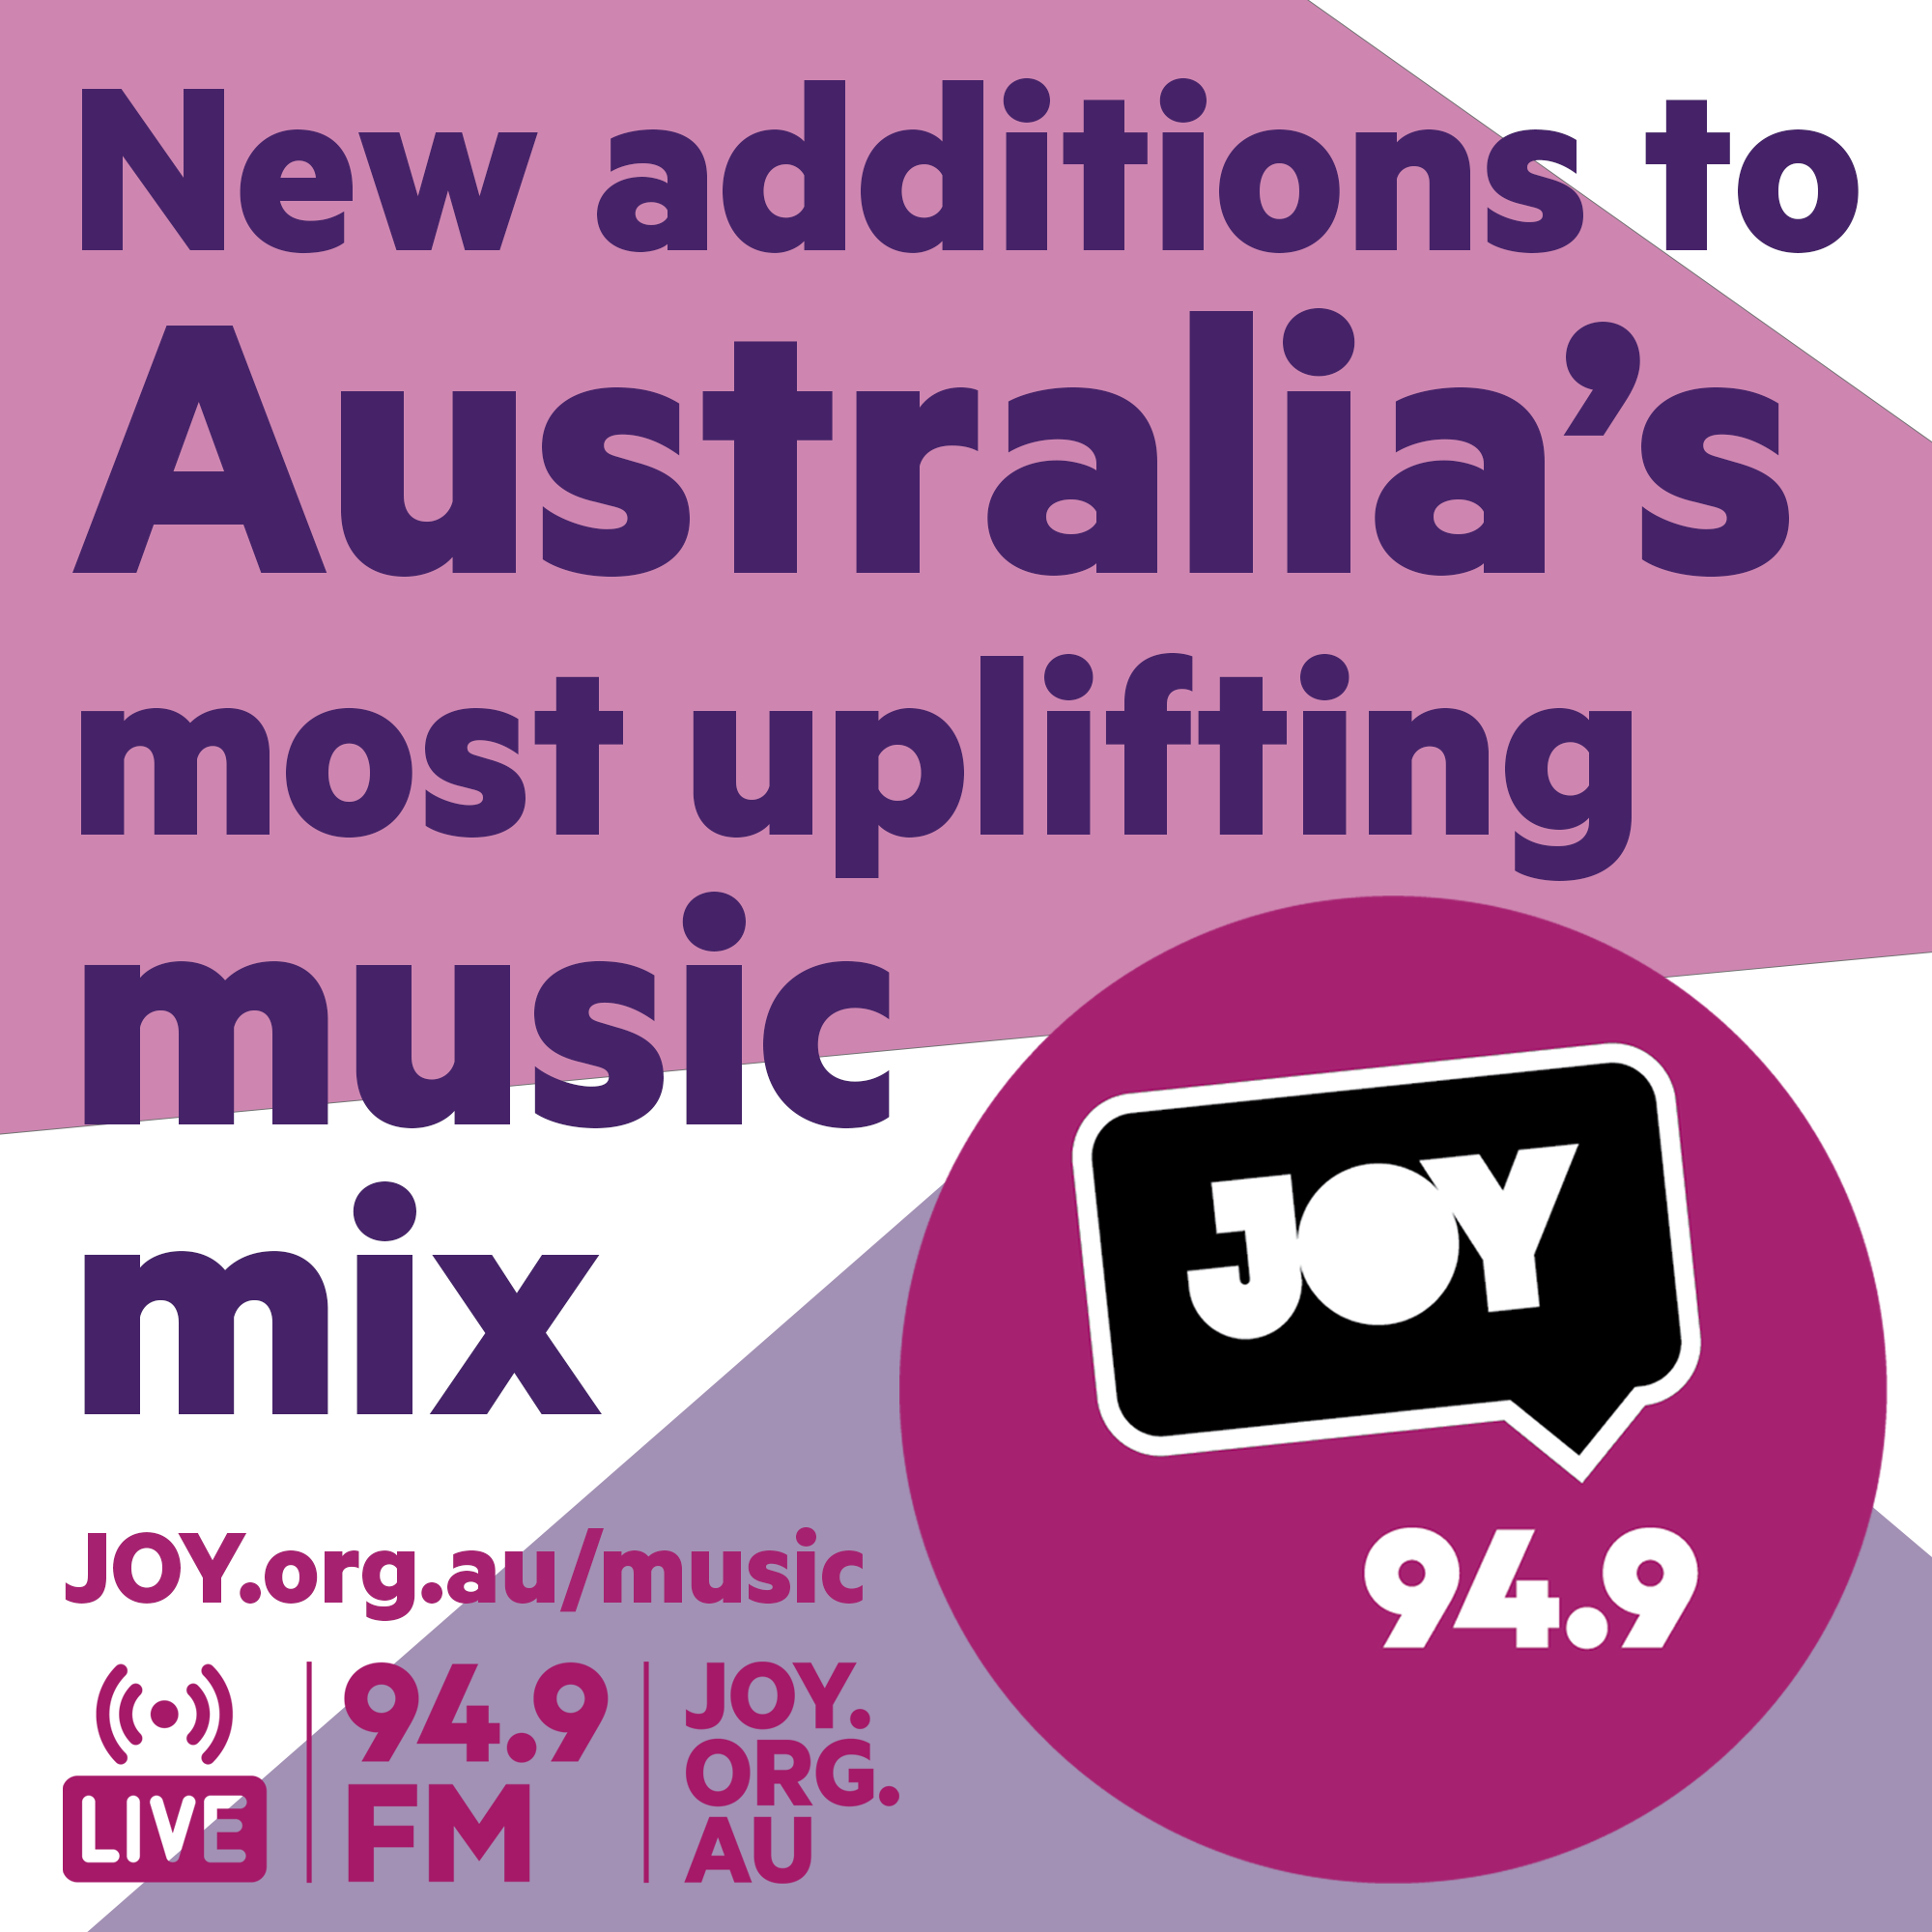 The newest songs to Australia’s most uplifting music mix: 26 January 2022